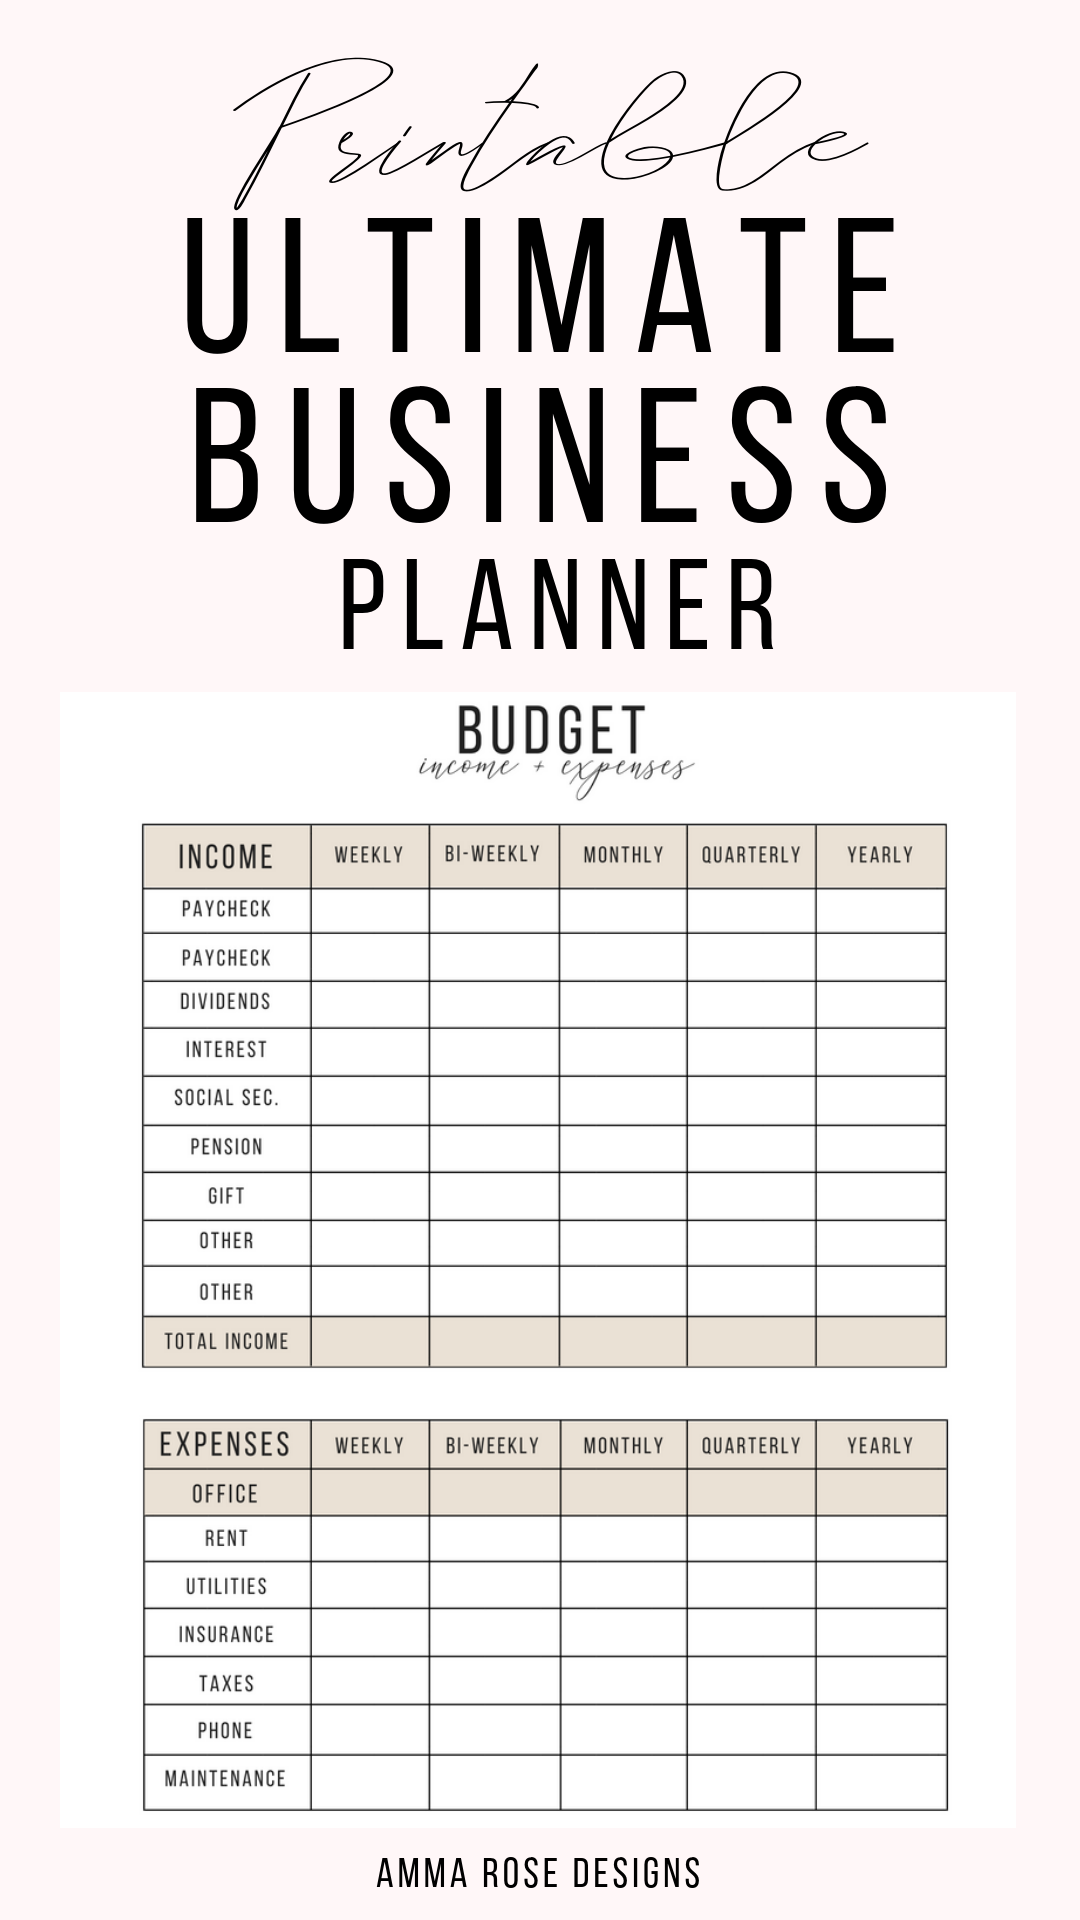 Business Planner Printable | Business Planner PDF | Business Planning | Business Planner | Business Bundle | 2019 Business | Small Business -   12 Event Planning Pricing guide ideas